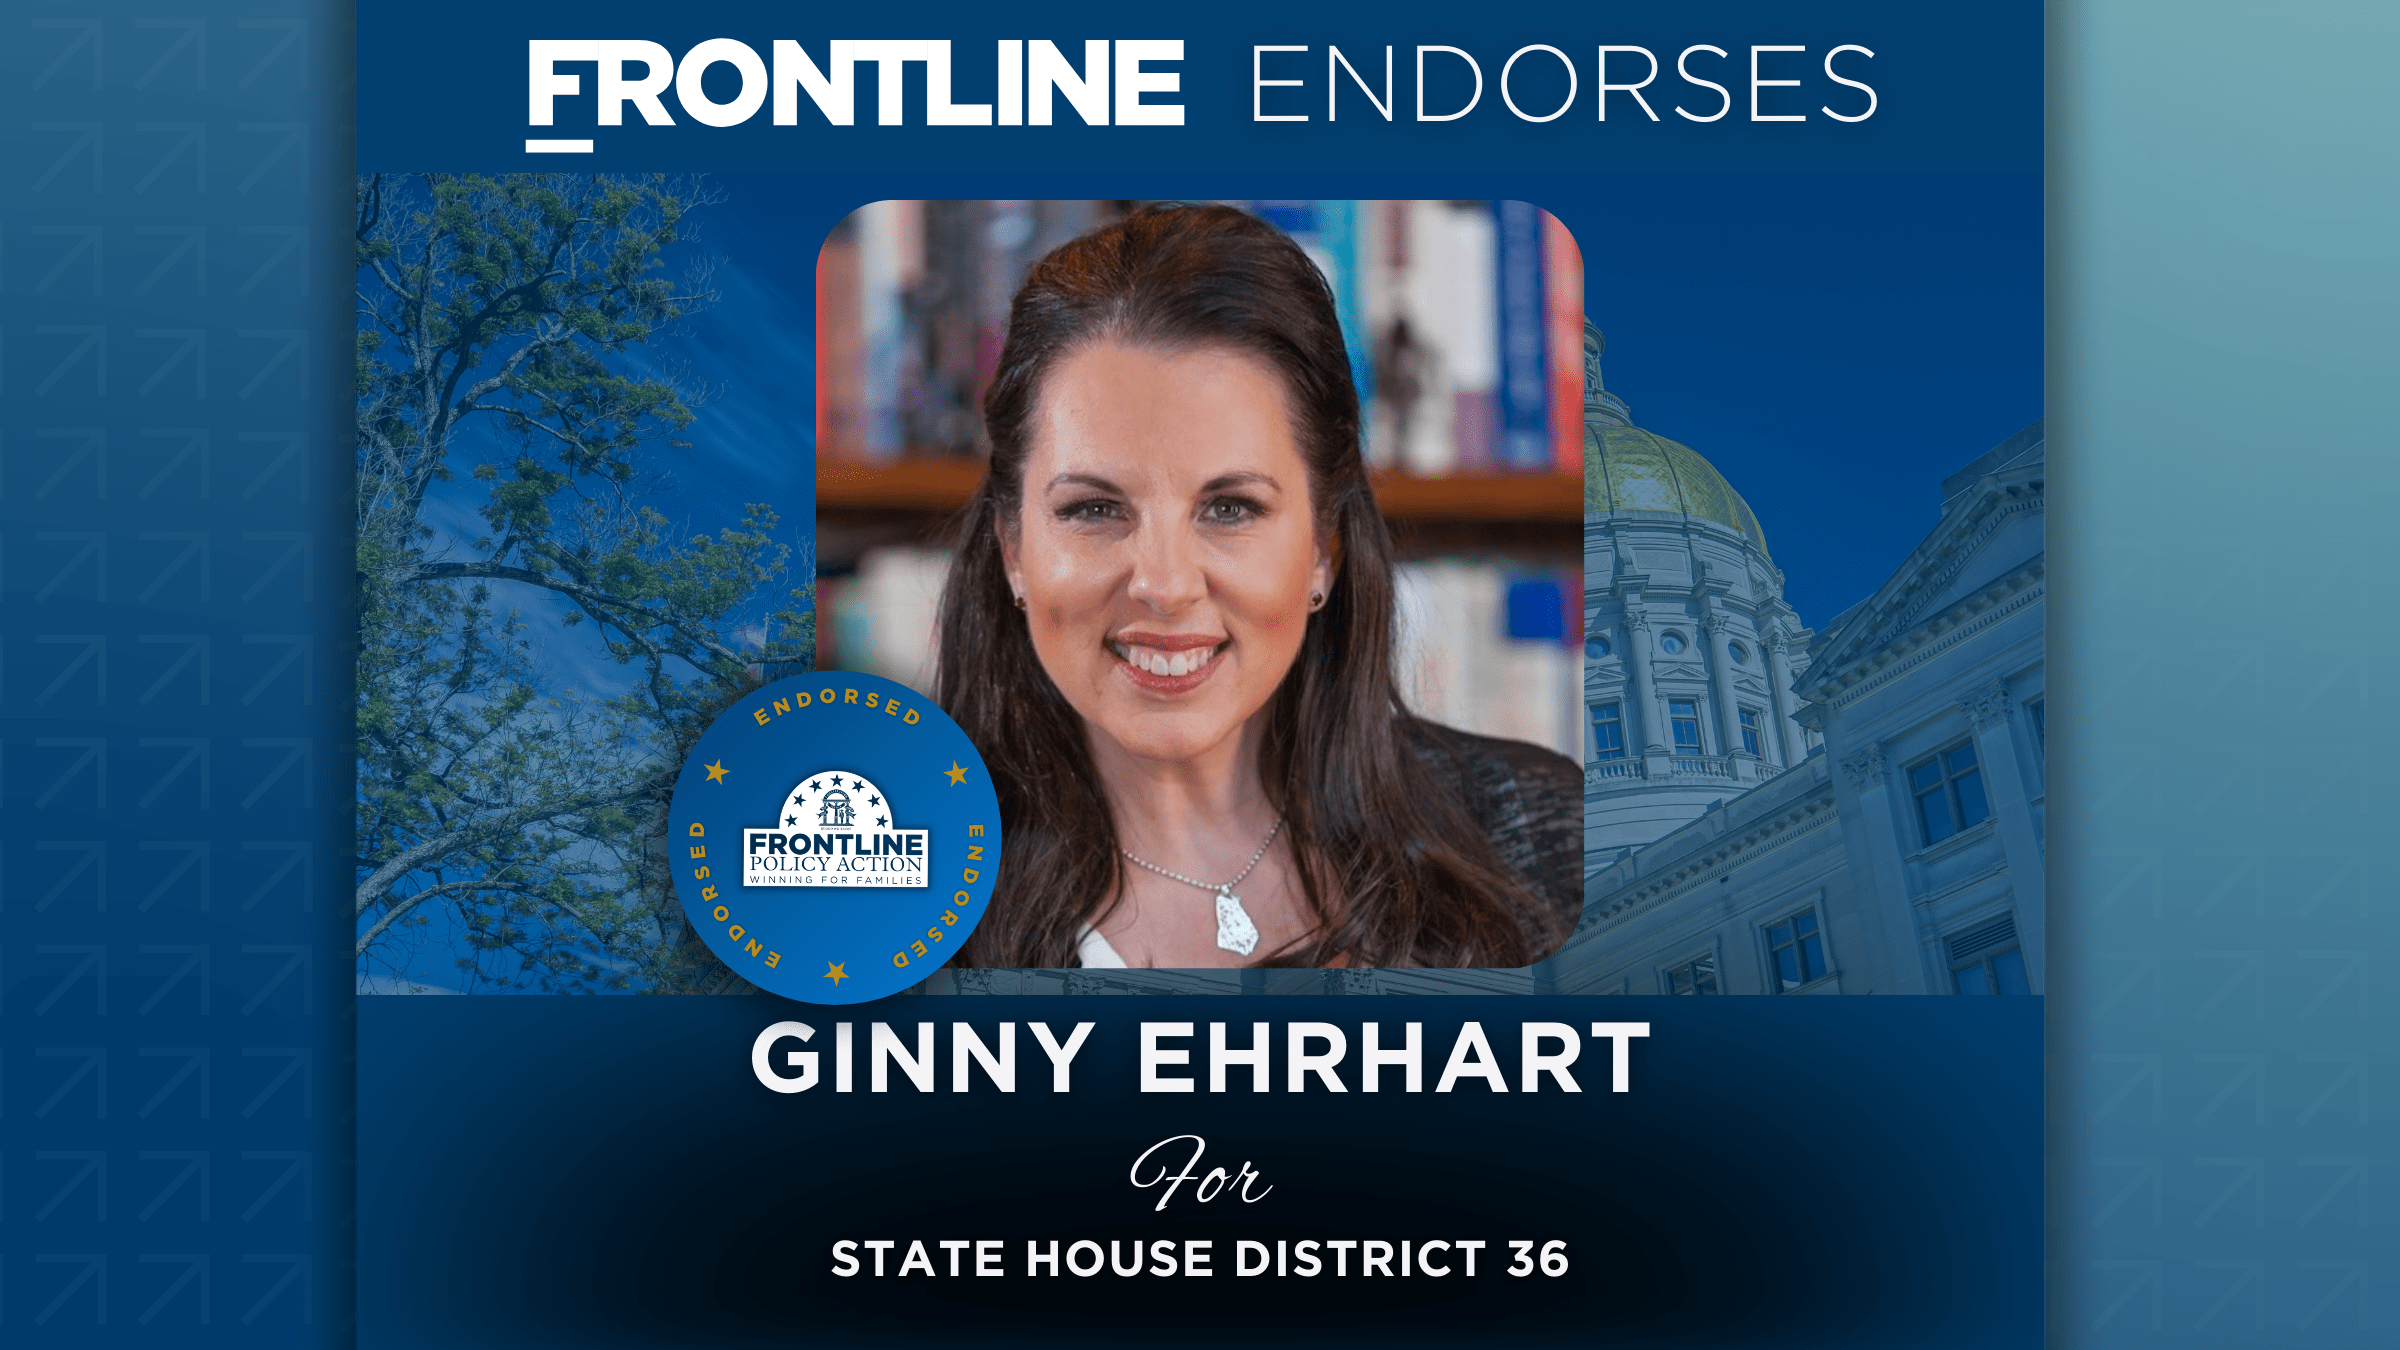 BREAKING: Frontline Endorses Ginny Ehrhart for State House District 36